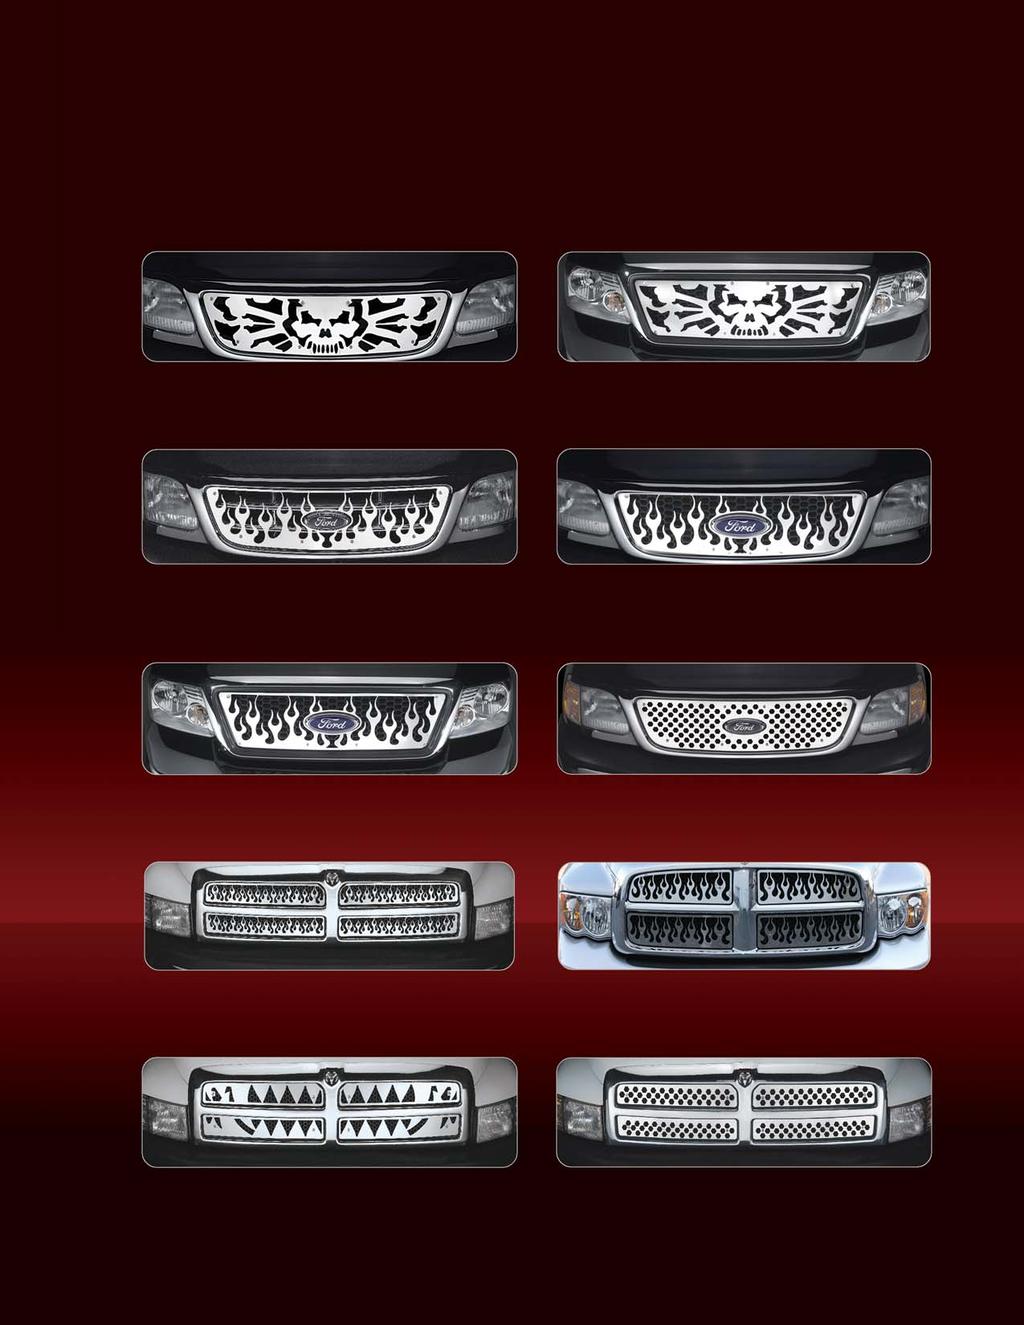 STAINLESS STEEL GRILLE INSERTS SG-3 99-03 Ford F-150 / 50LD (Honeycomb Grill) 004 Ford F-150 Heritage (Honeycomb Grill) SG-33 04-Up Ford F-150 (Honeycomb Grill) SG-41 99-03 Ford F-150 / 50LD (Bar